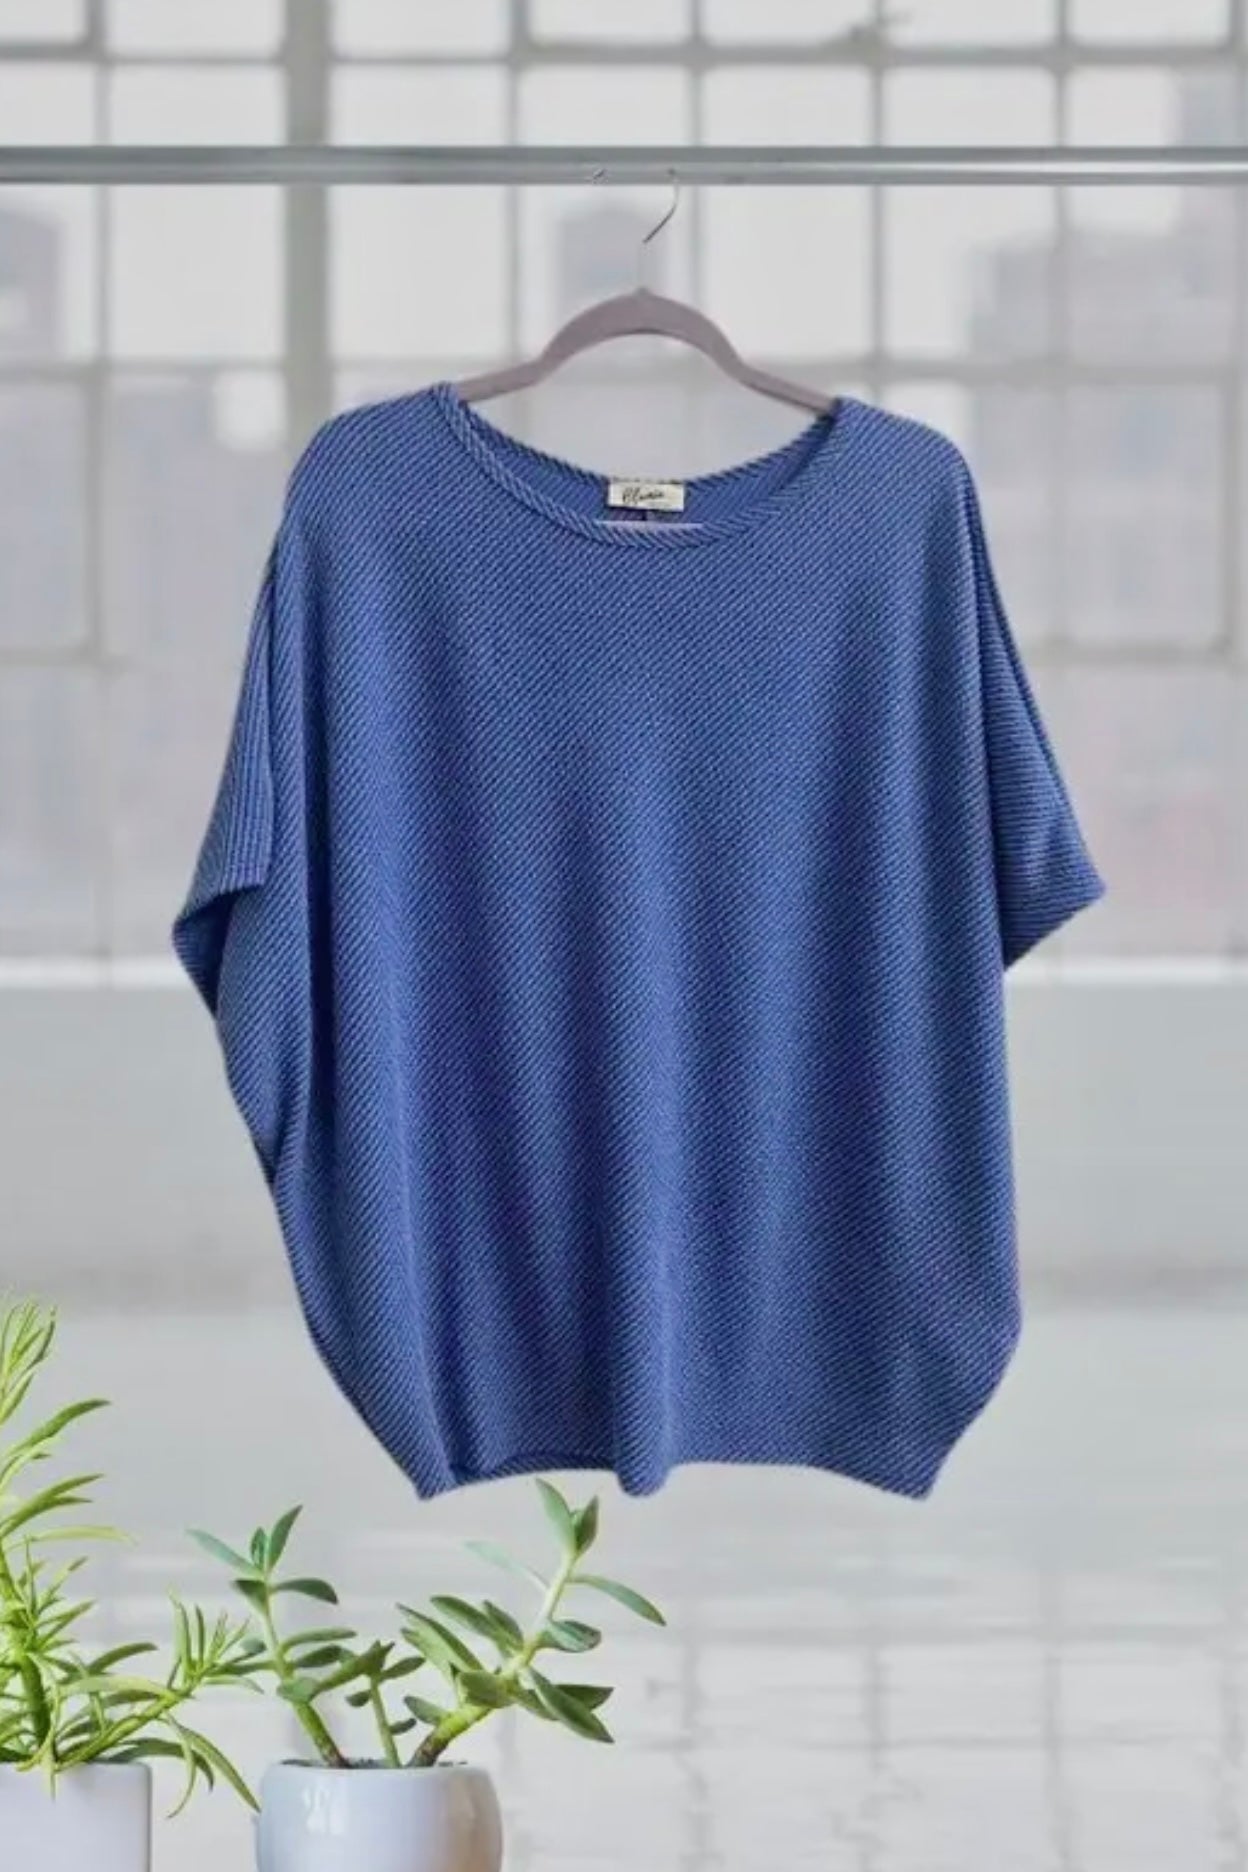 Plus Peacock Blue Ribbed Mineral Washed Stretchy Top